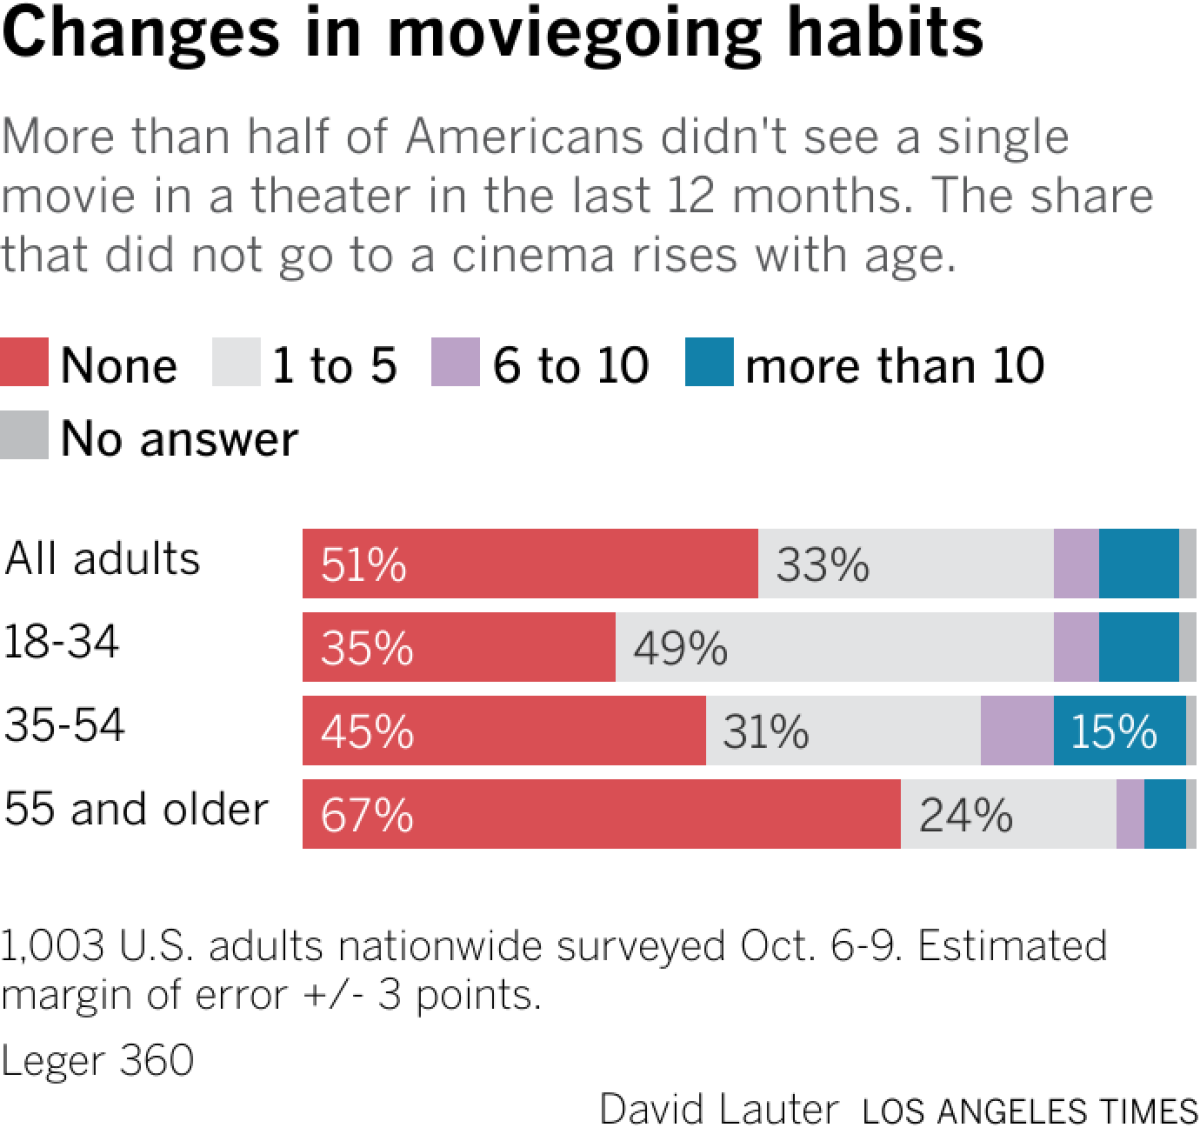 A stacked bar chart showing the percentage of adults going to theaters to watch movies, broken down by age group and the number of movies watched.